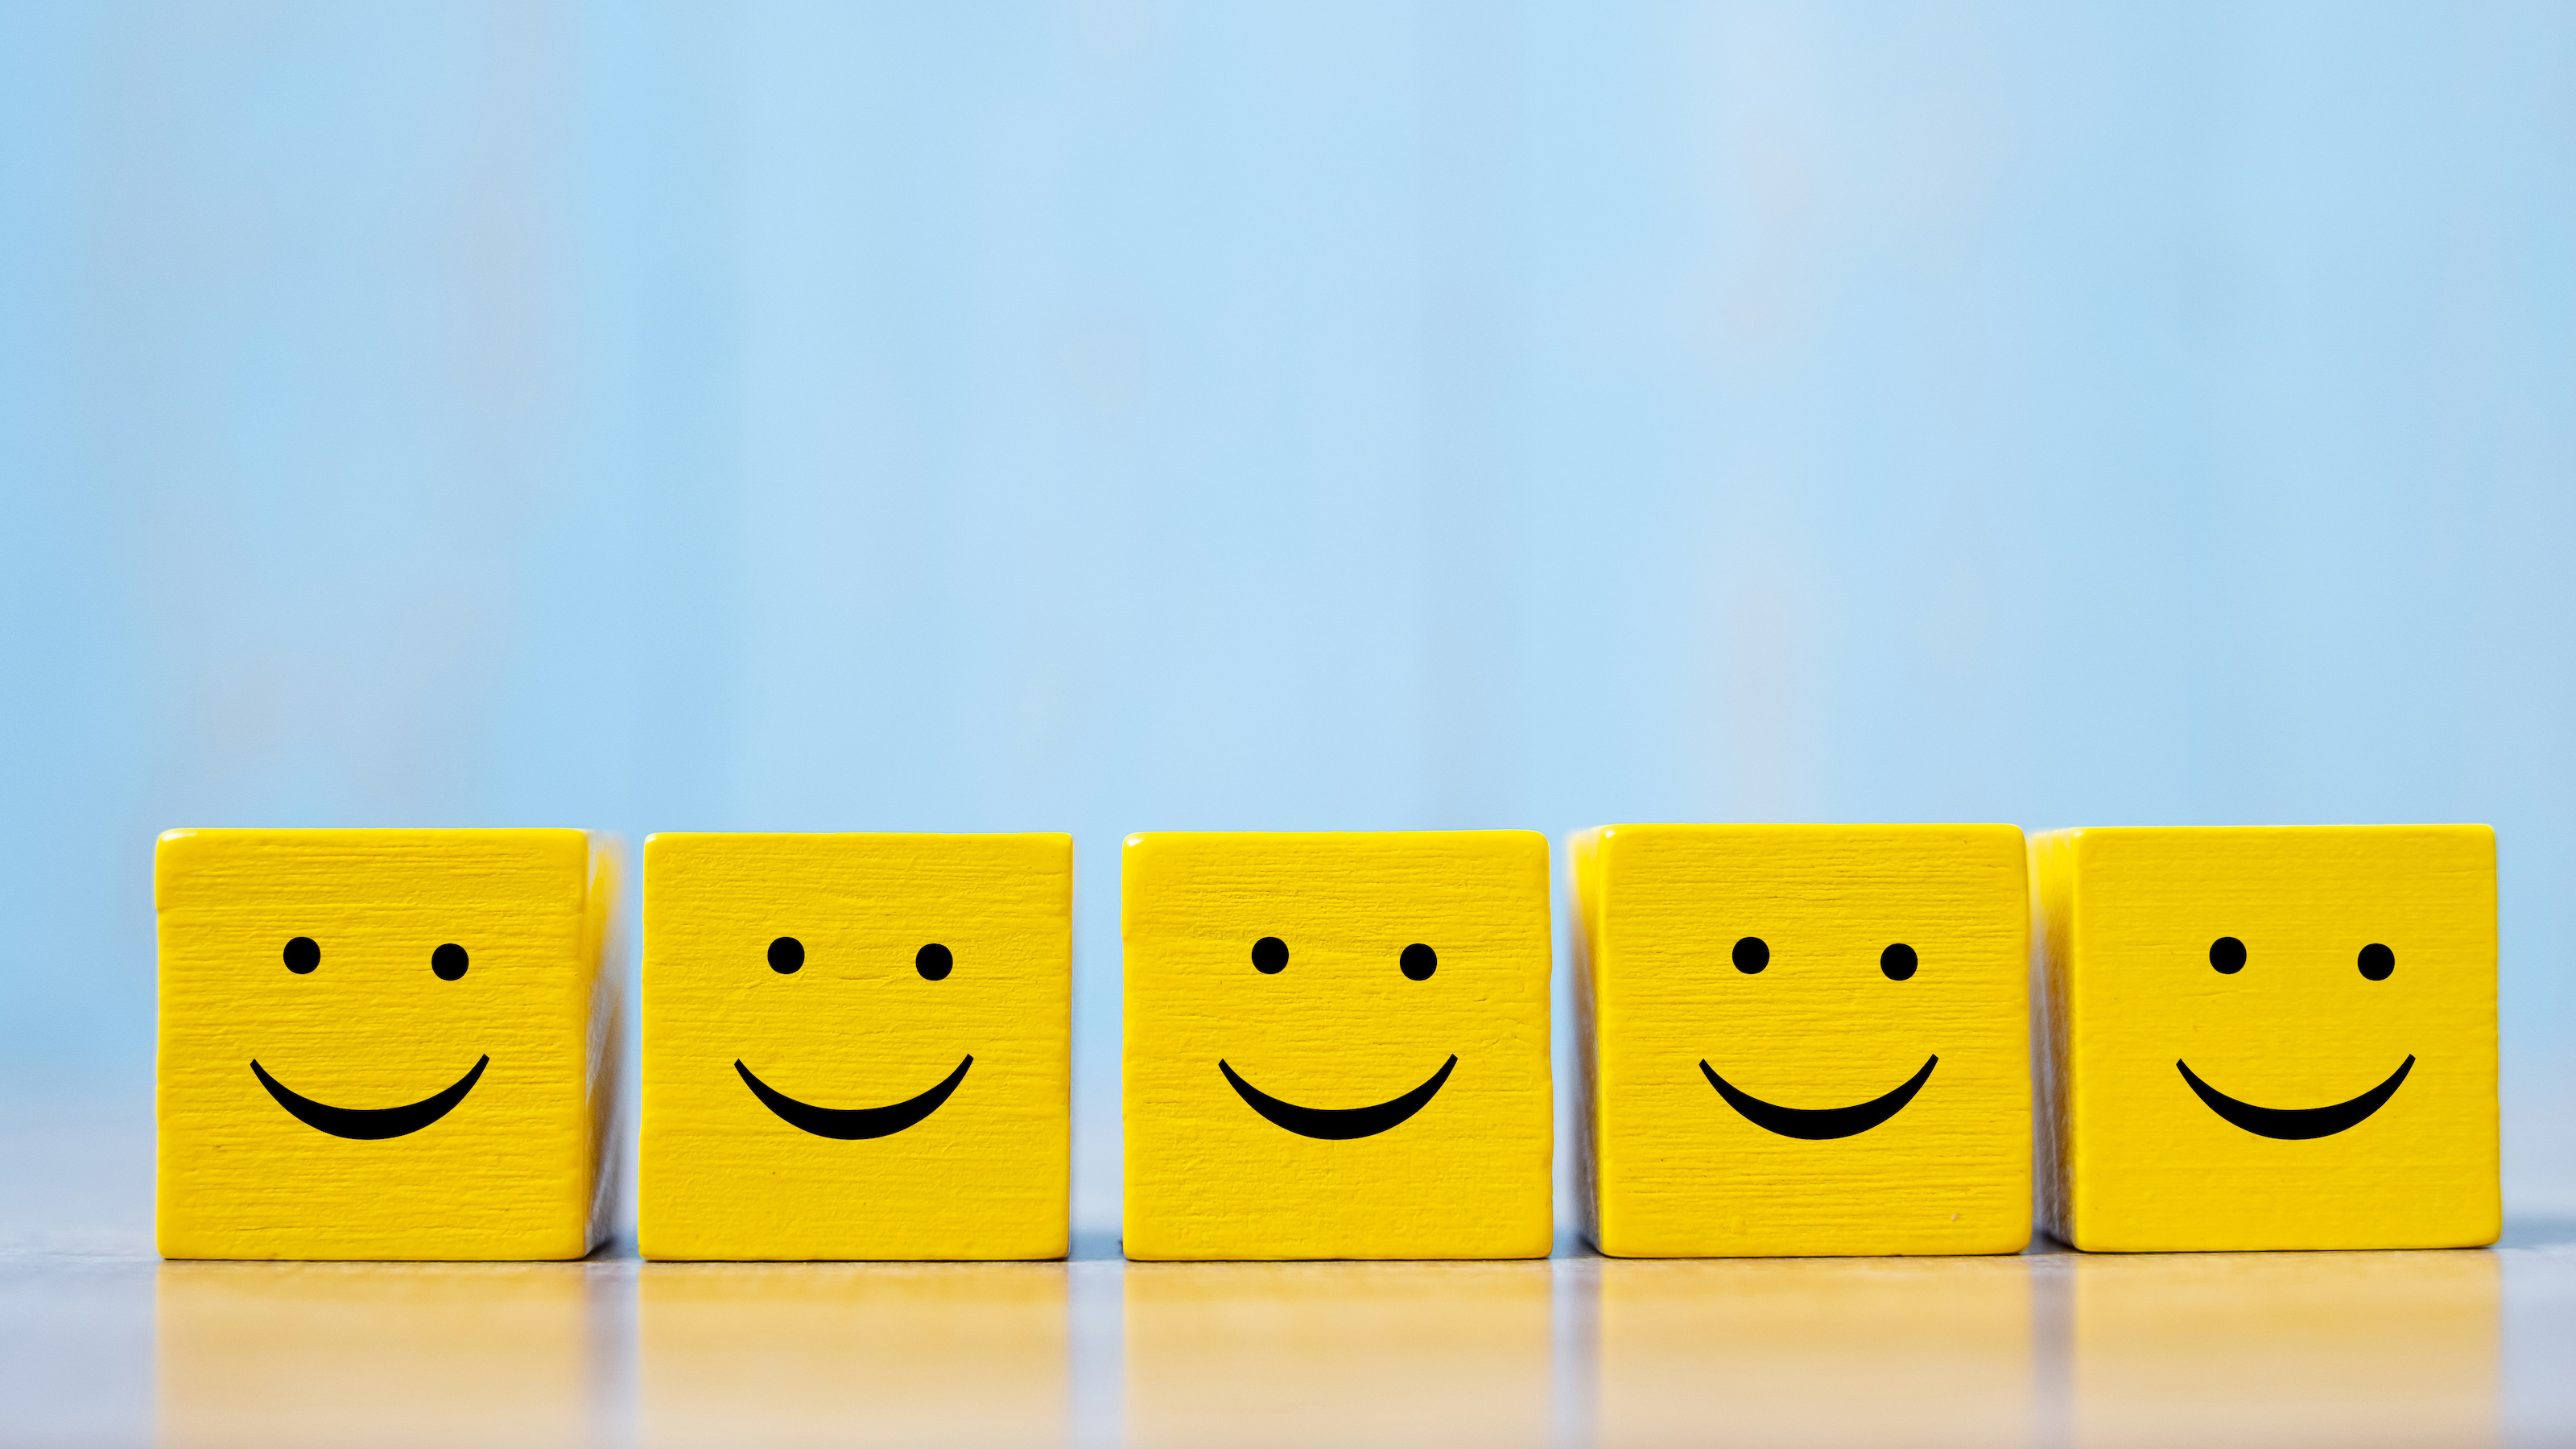 Five yellow blocks with smiling faces, representing workplace happiness, aligned in a row against a blue background.